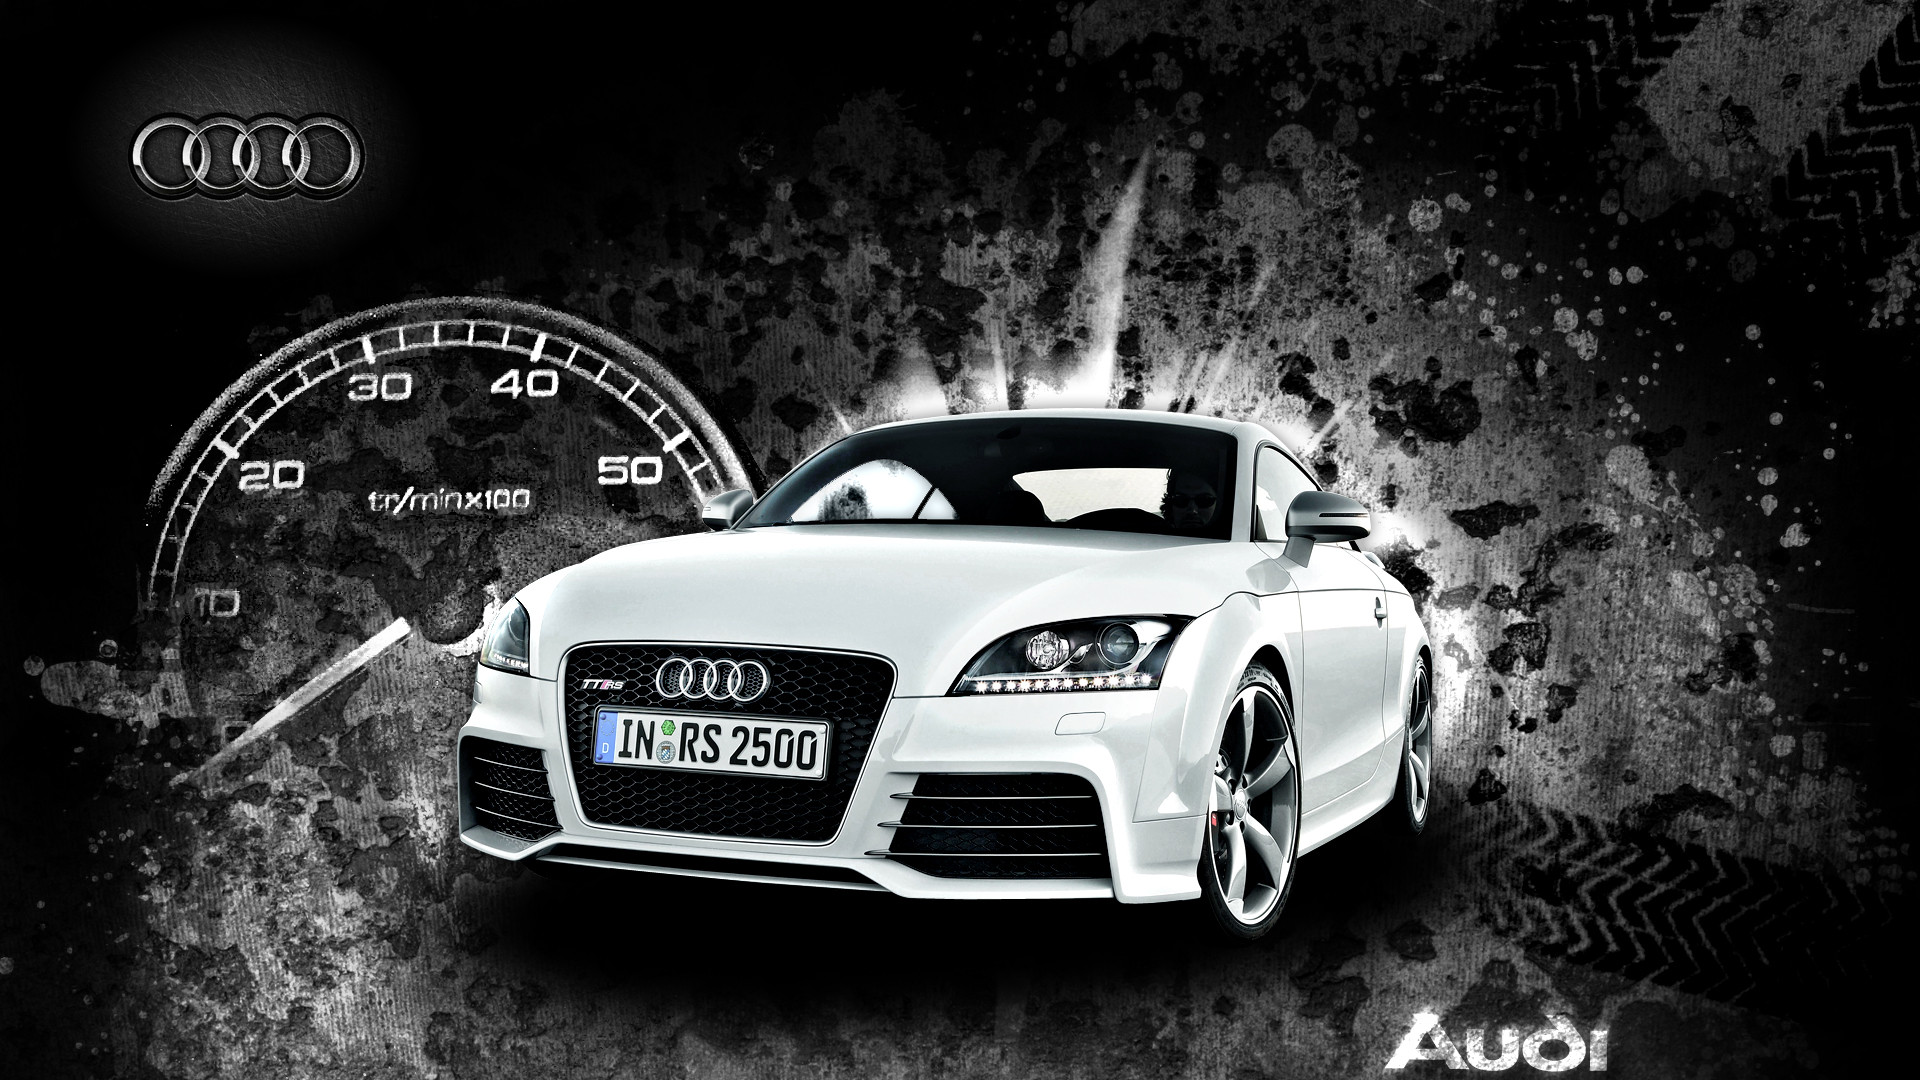 All New Audi TT RS Car Wallpapers For Desktop With High Resolution